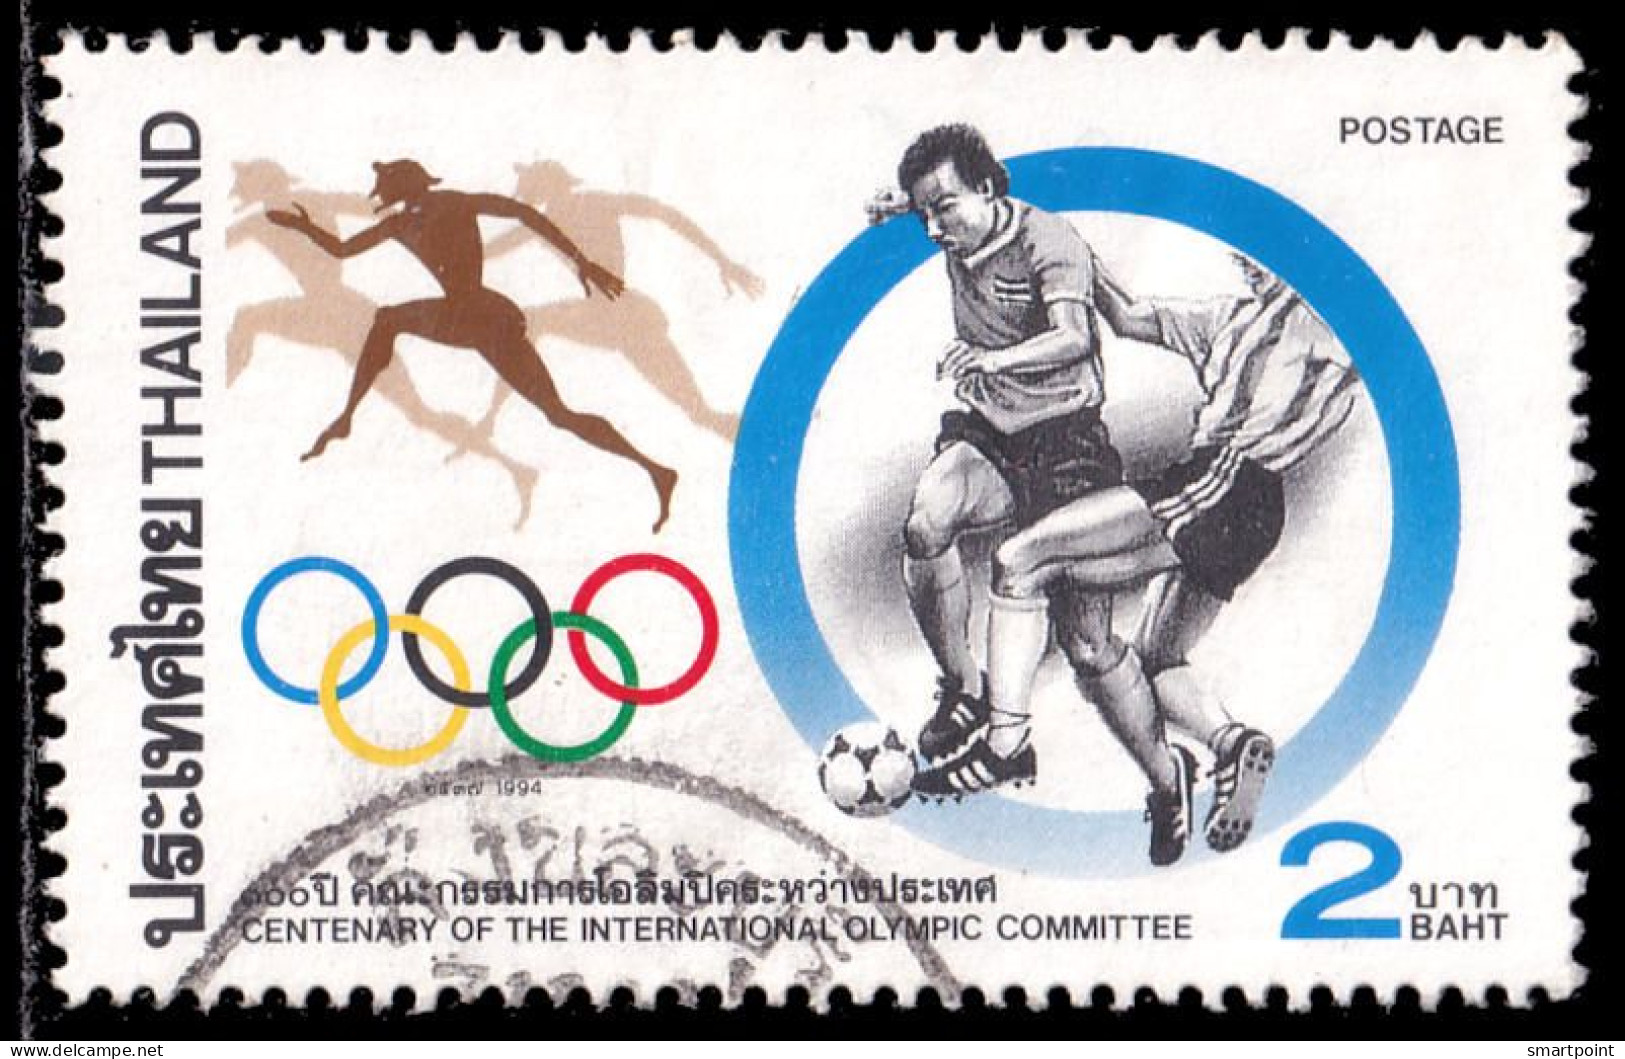 Thailand Stamp 1994 Centenary Of The International Olympic Committee 2 Baht - Used - Thailand